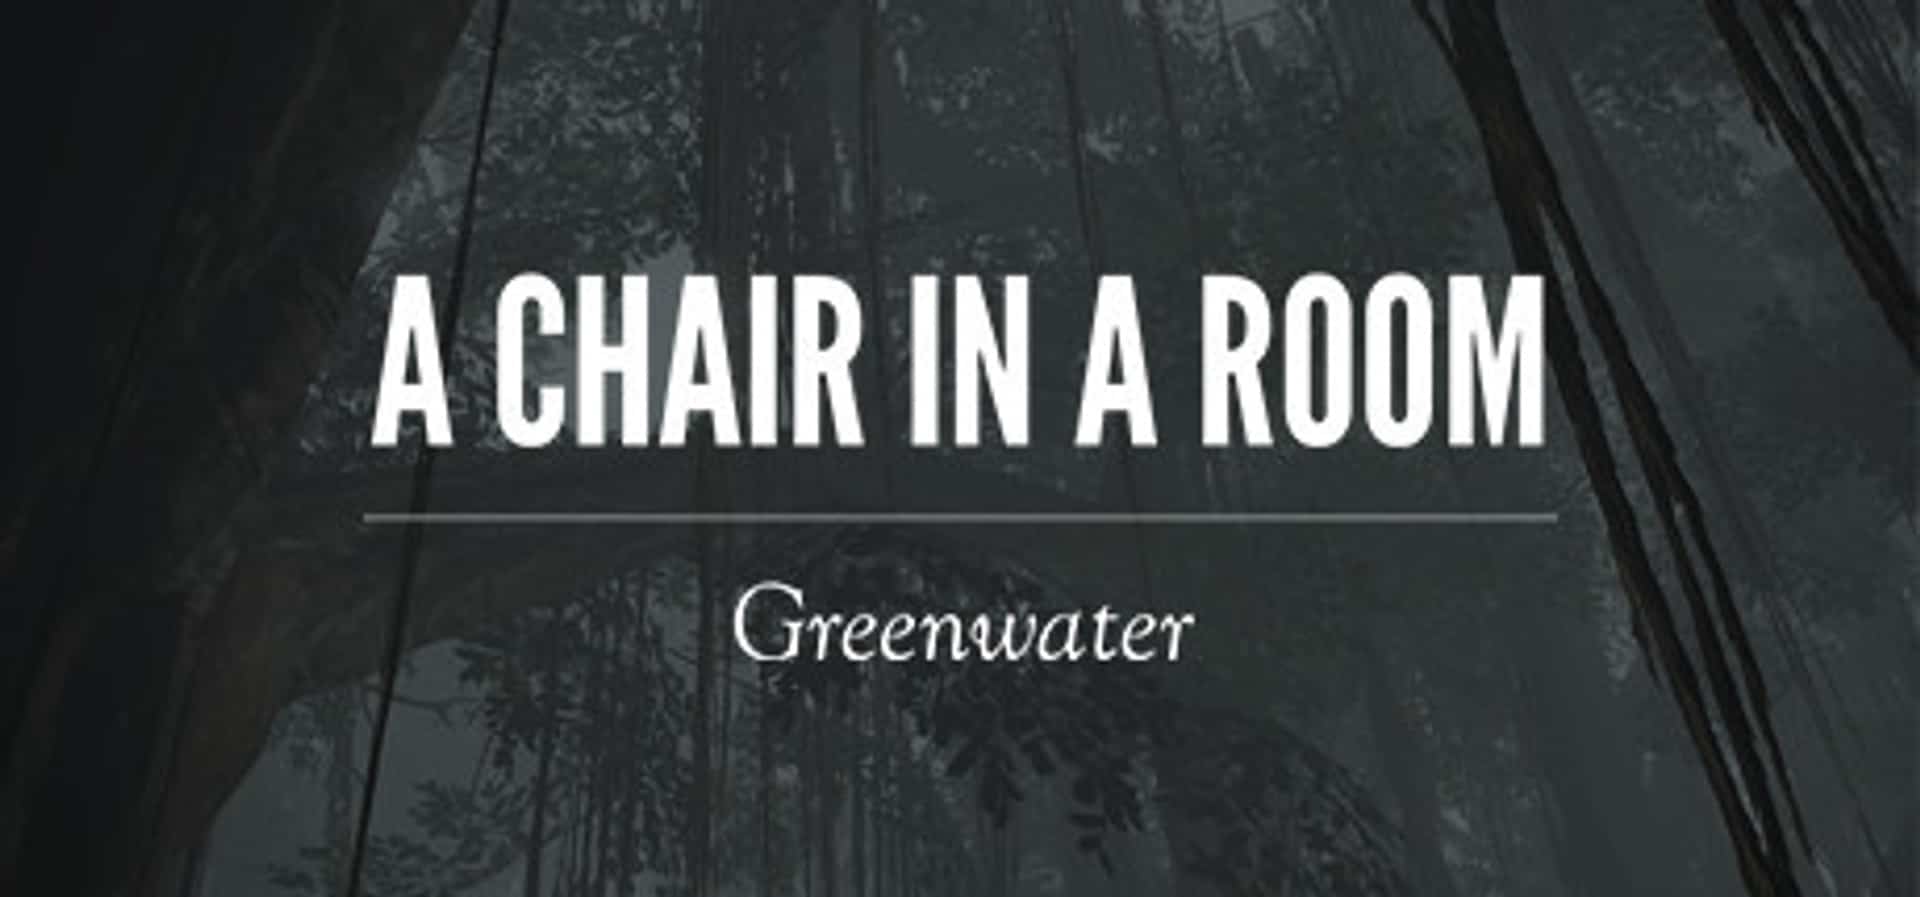 A Chair in a Room: Greenwater